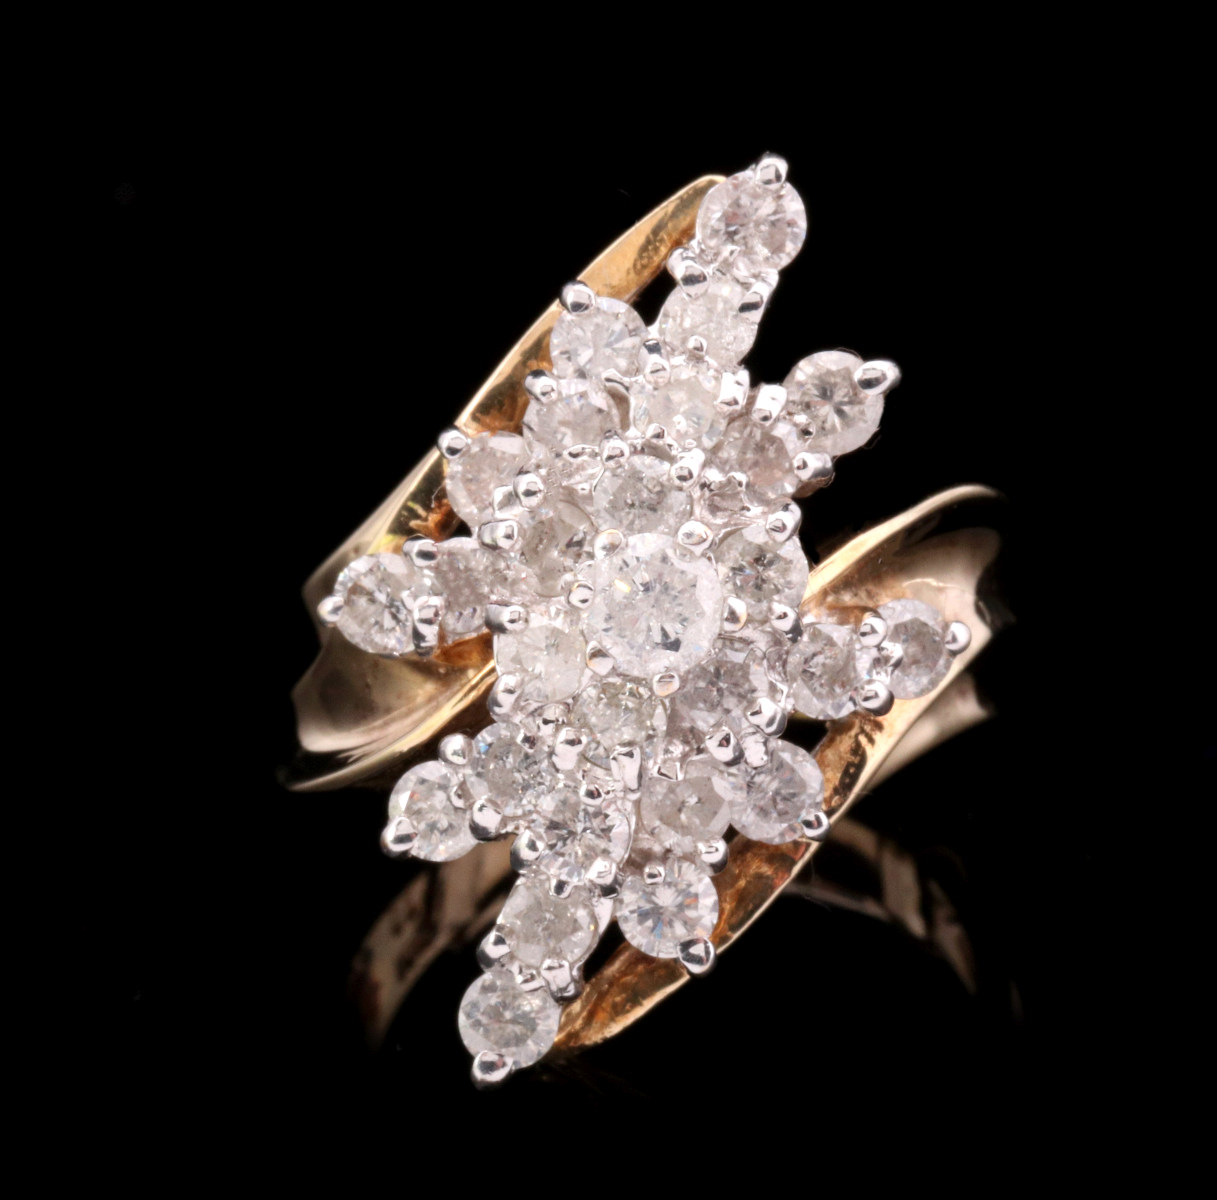 A LADIES' 10K GOLD AND DIAMOND COCKTAIL RING